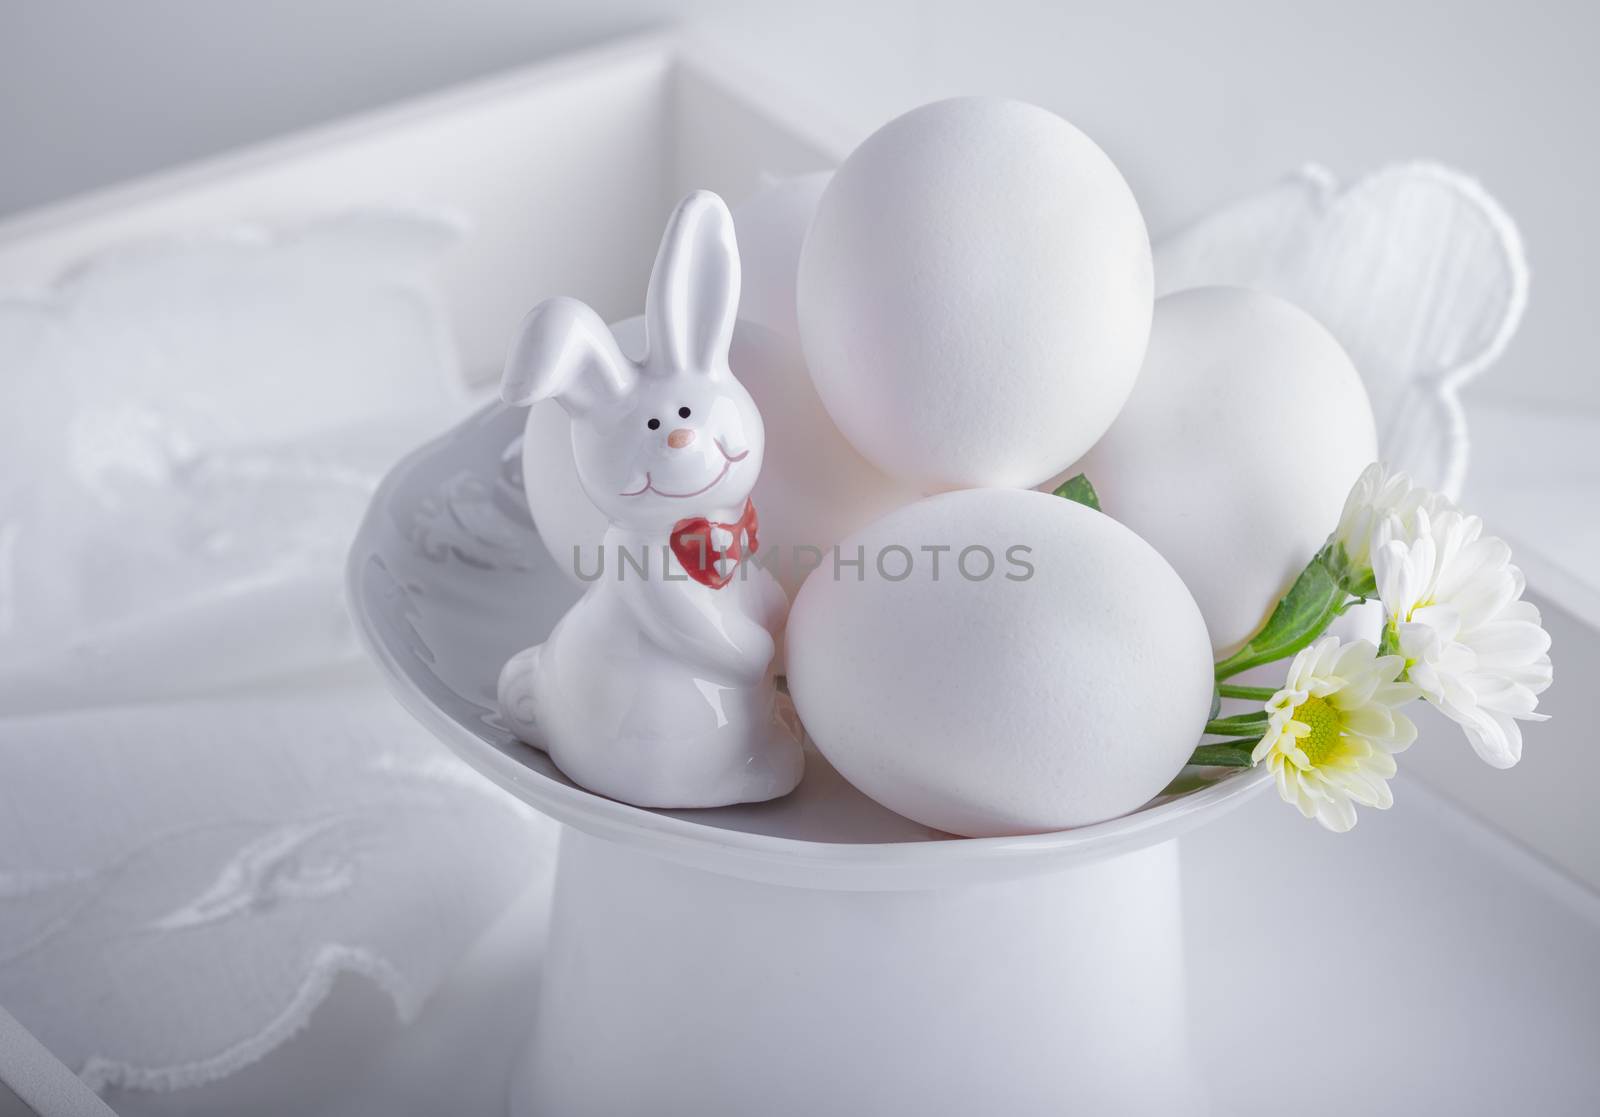 Eggs Rabbit and flowers on white surface by supercat67